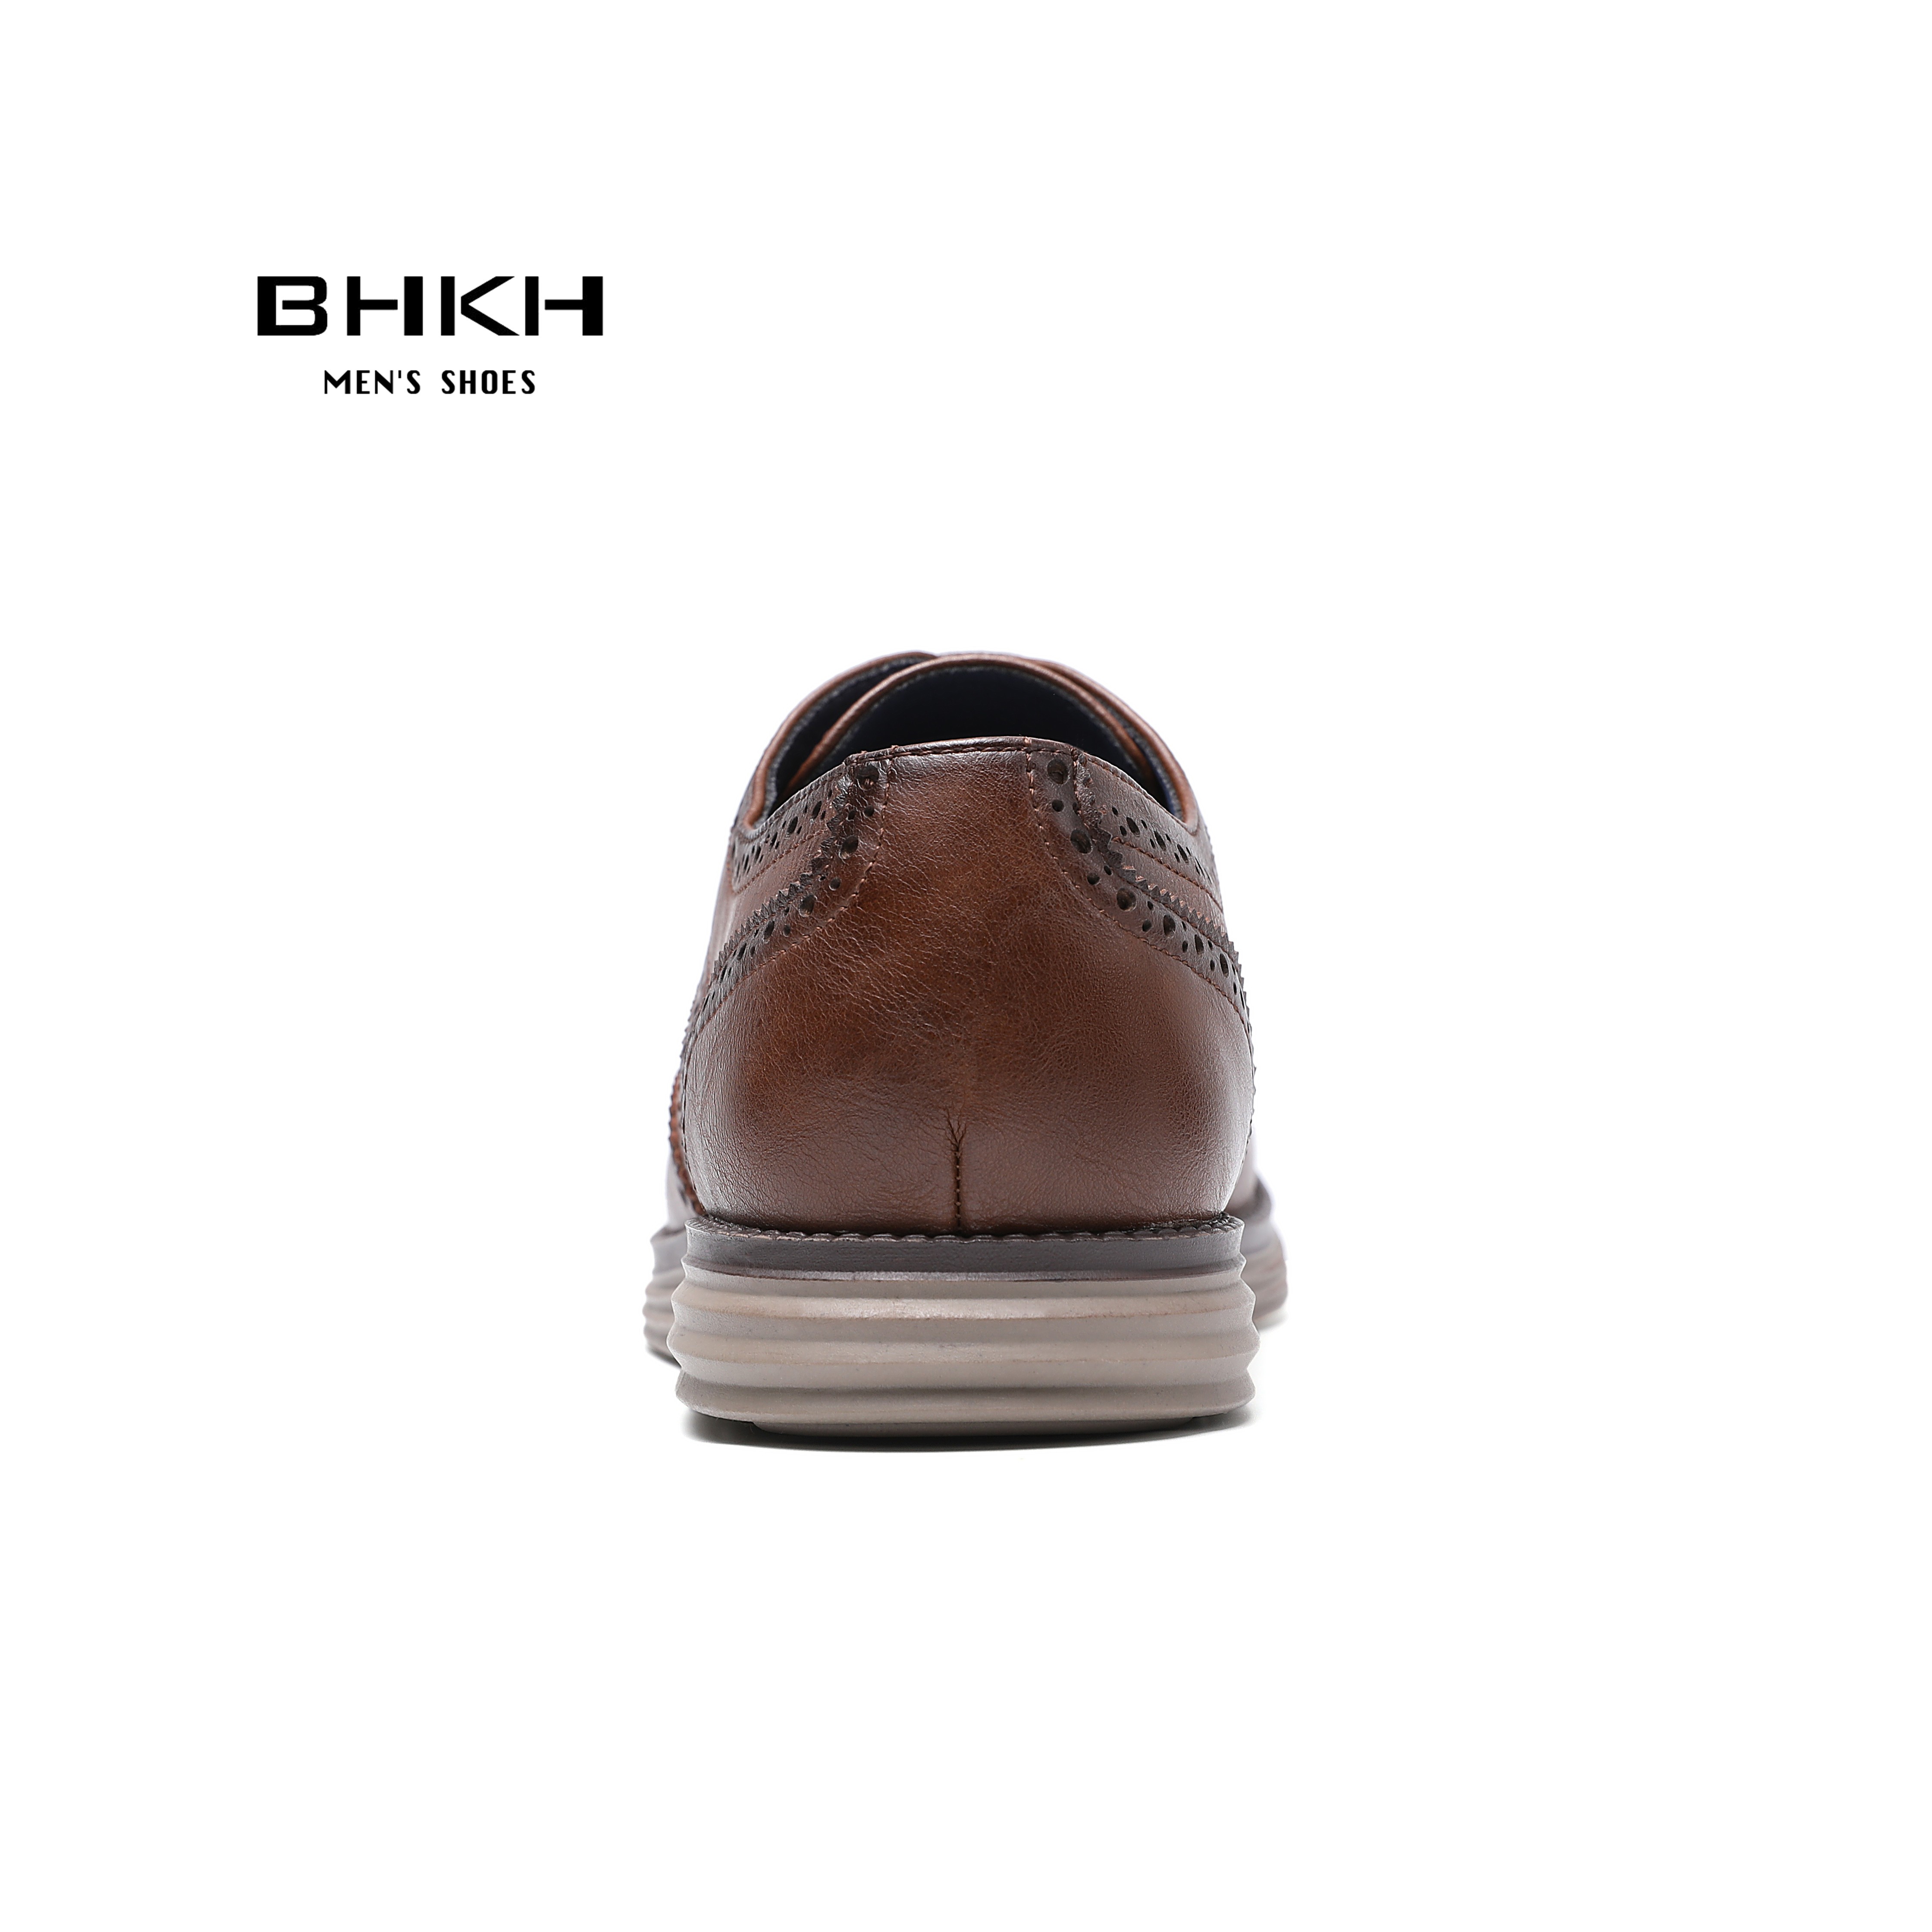 BHKH 2022 Genuine Leather Dress Shoes Comfortable Men Casual Shoes Smart Business Office Work Lace-up Men Shoes